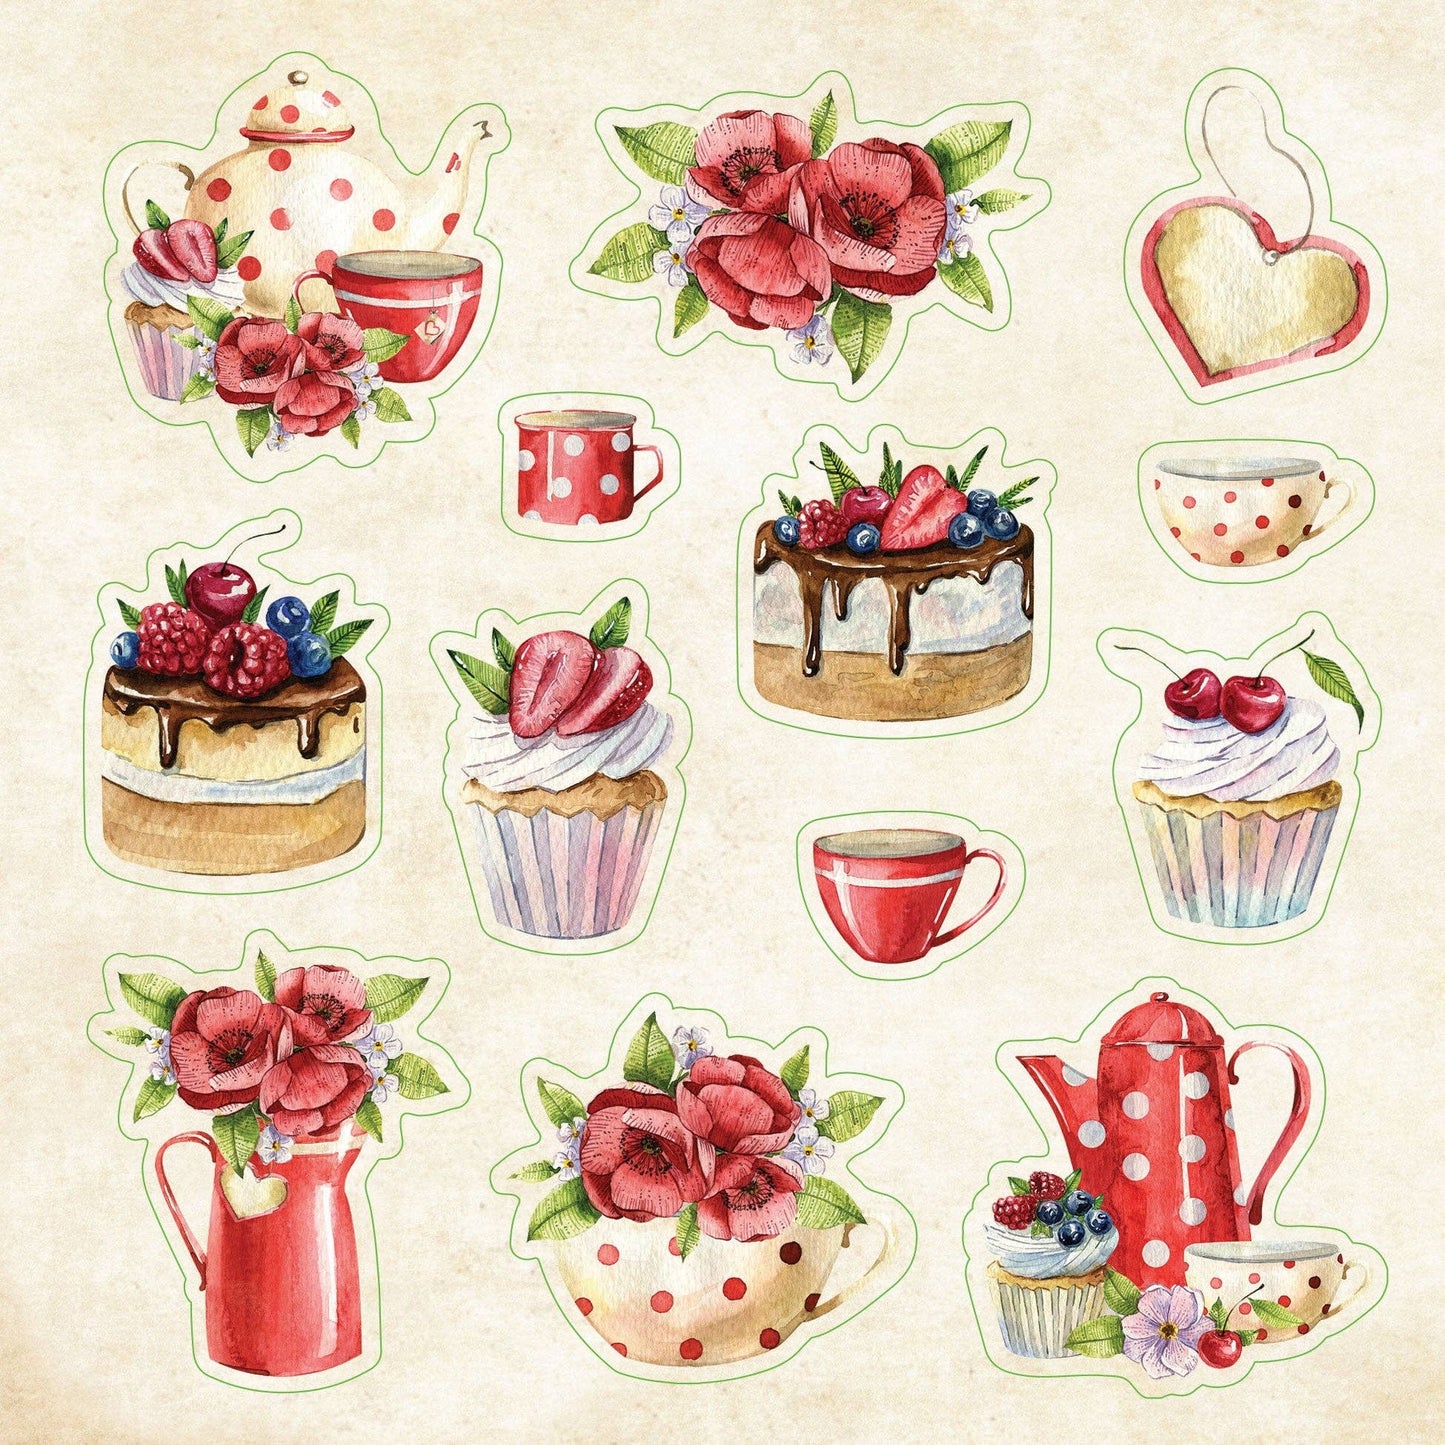 Cottagecore Sticker Book | Idyllic Collectin of Cozy Stickers | Over 650 Stickers